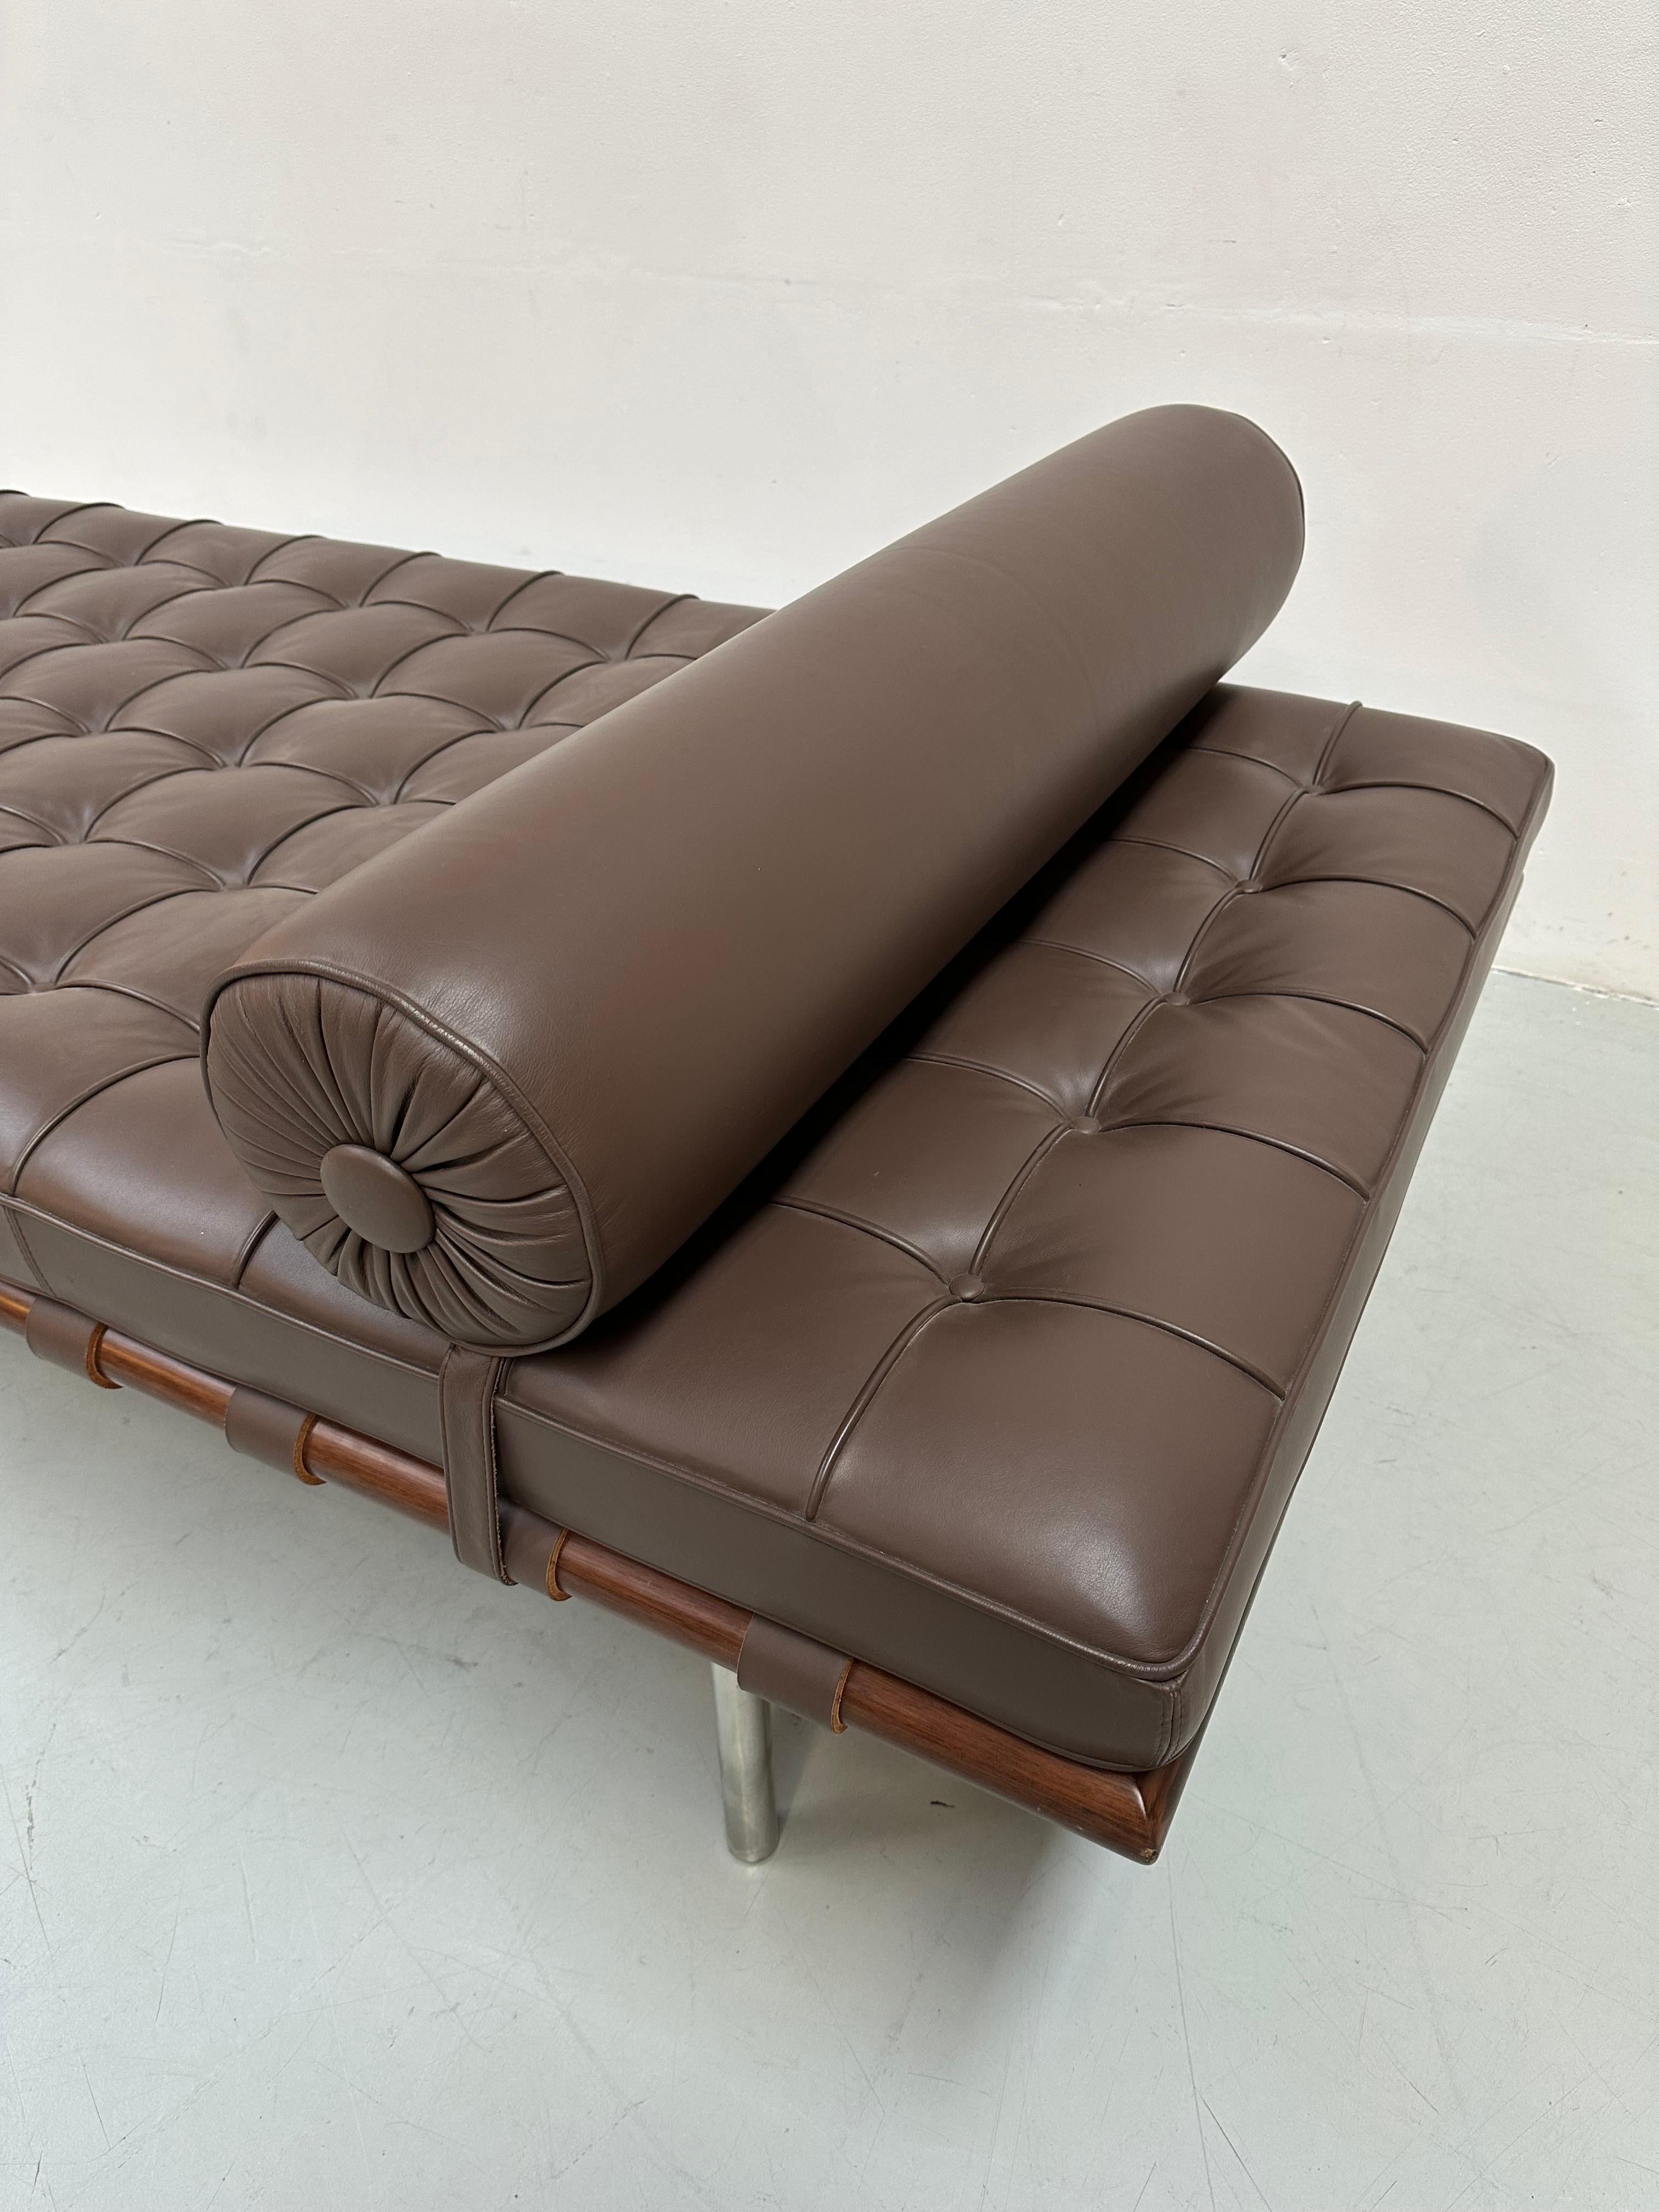 Barcelona Daybed in Brown Leather by Ludwig Mies van der Rohe for Knoll, 1980s. In Good Condition For Sale In Eindhoven, Noord Brabant